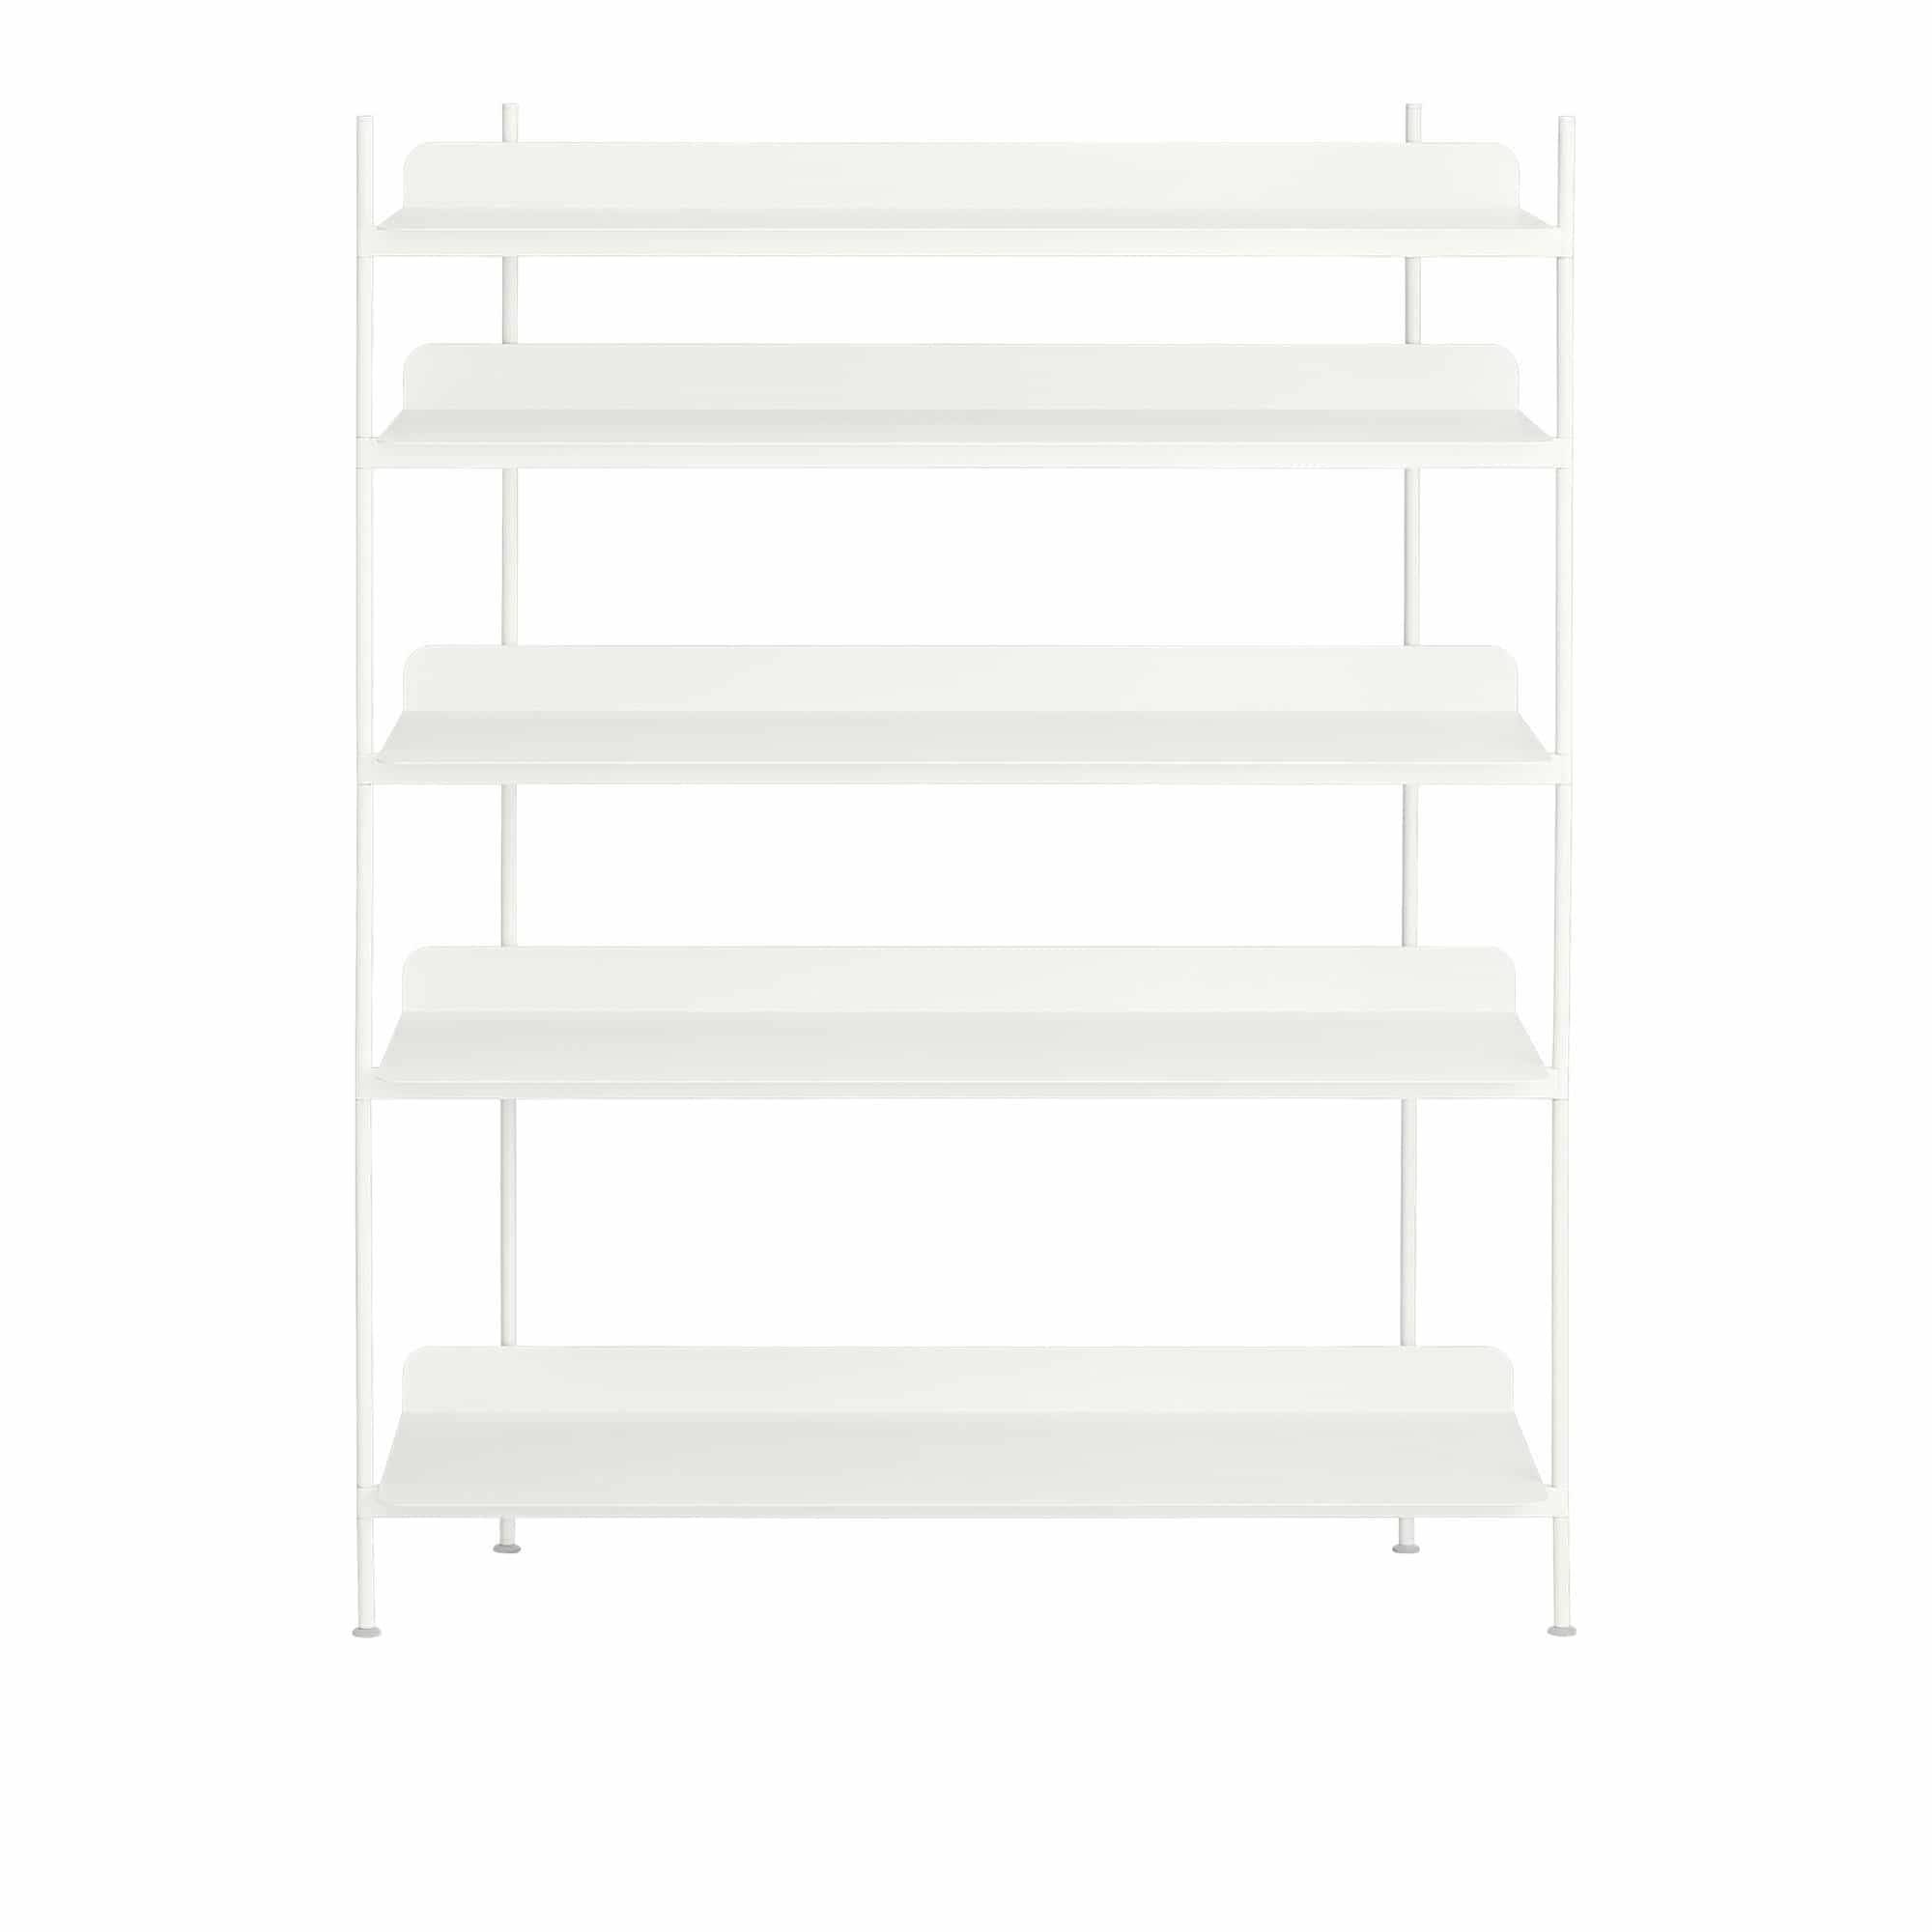 Compile Shelving System - Configuration 3